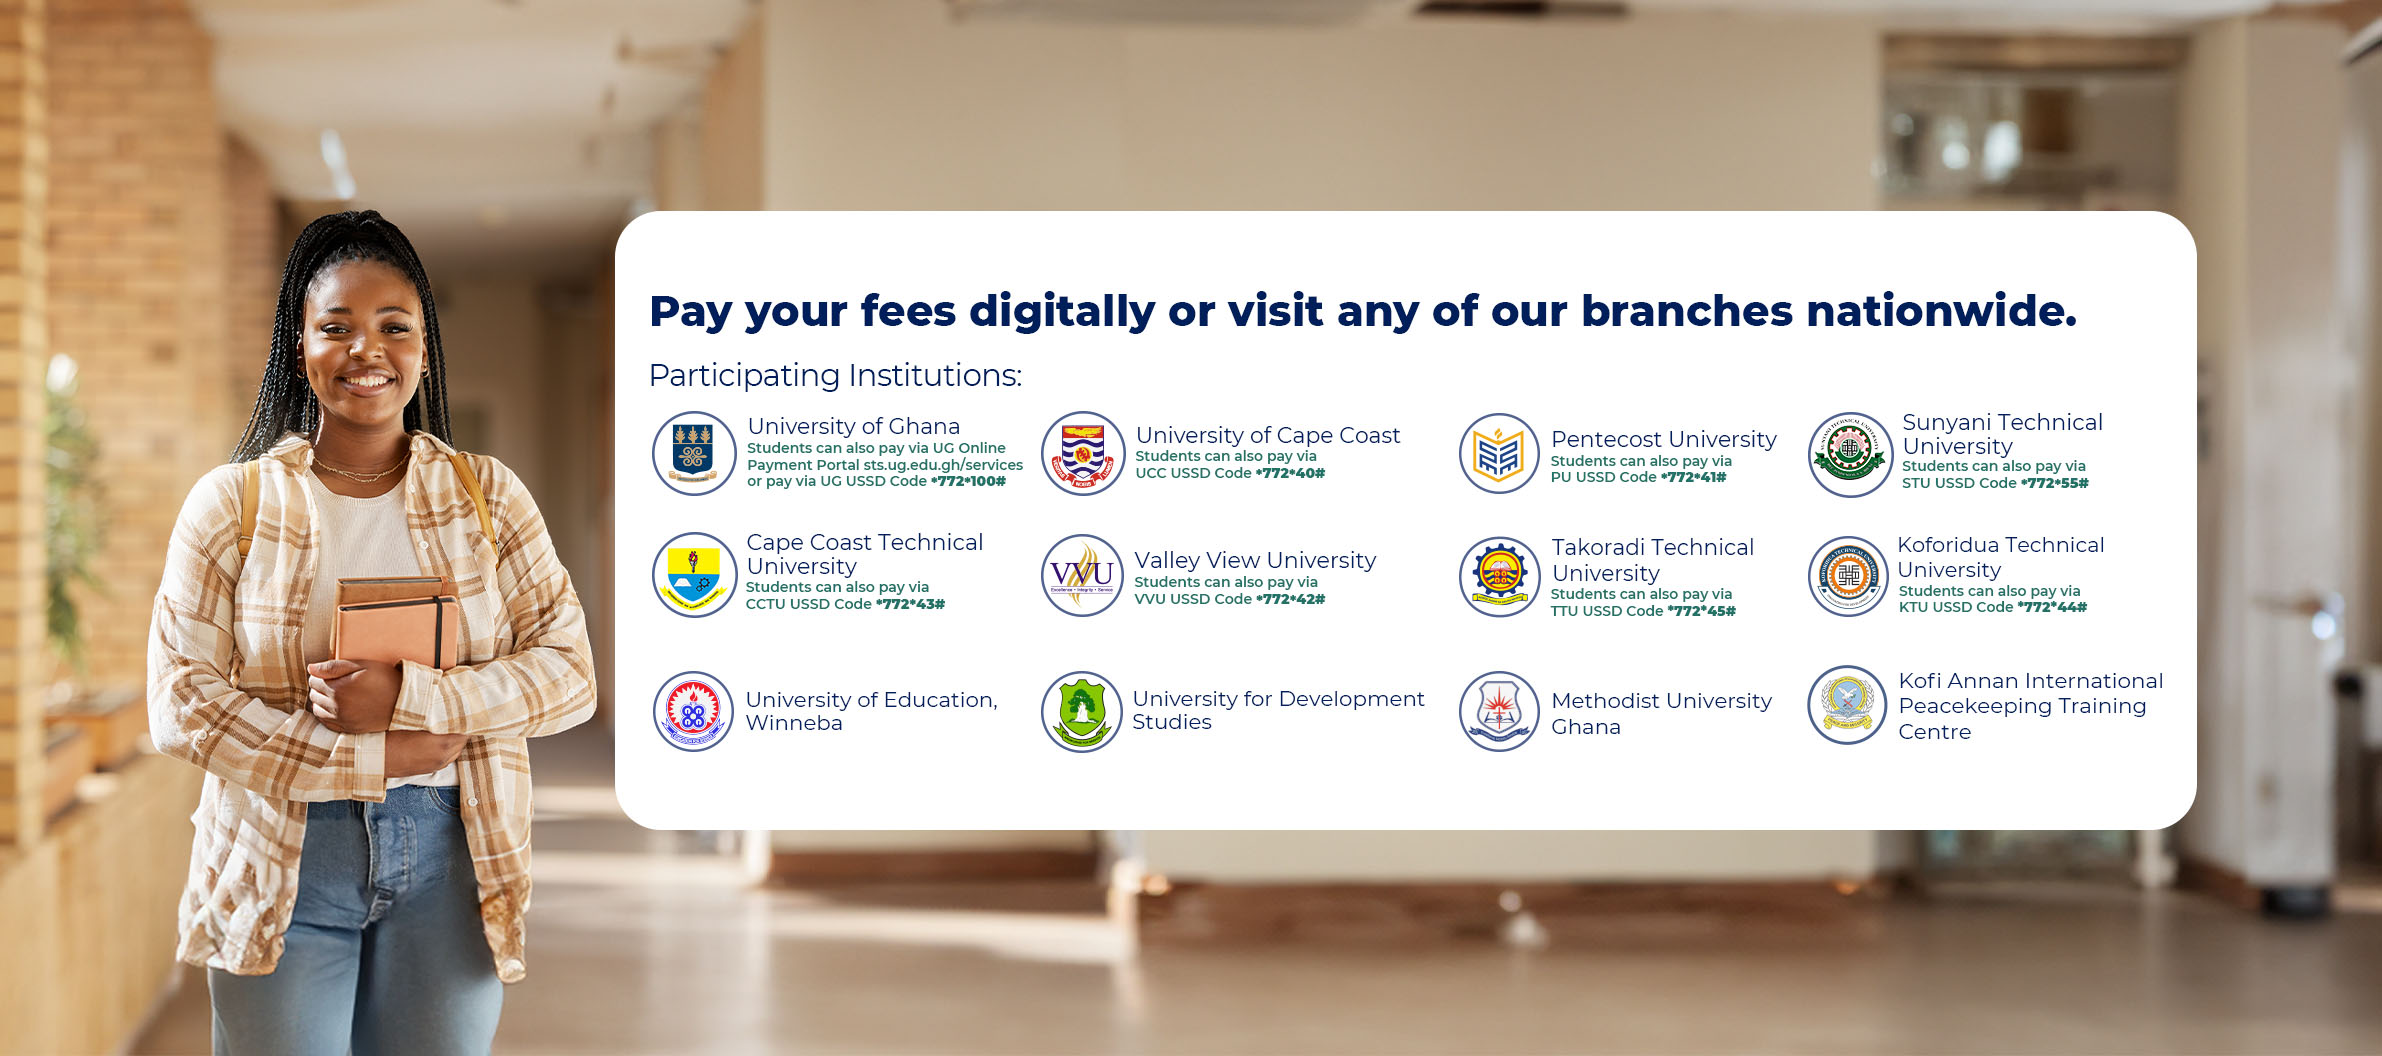 Pay Your Fees with Ease